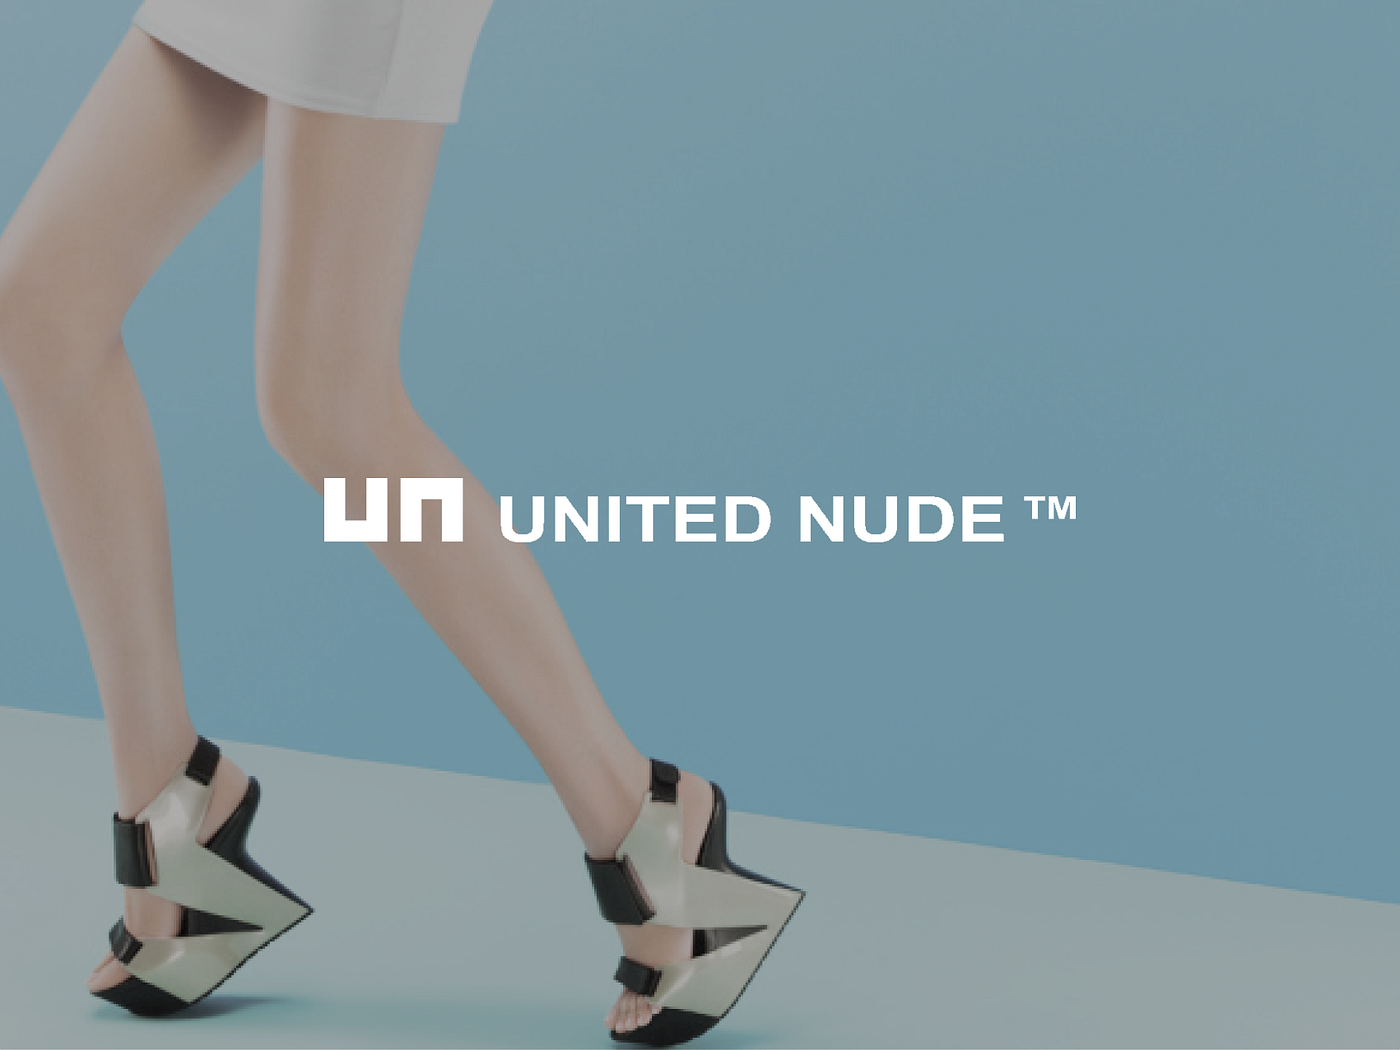 Luxury shoe brand United Nude increases conversion by 20 % with